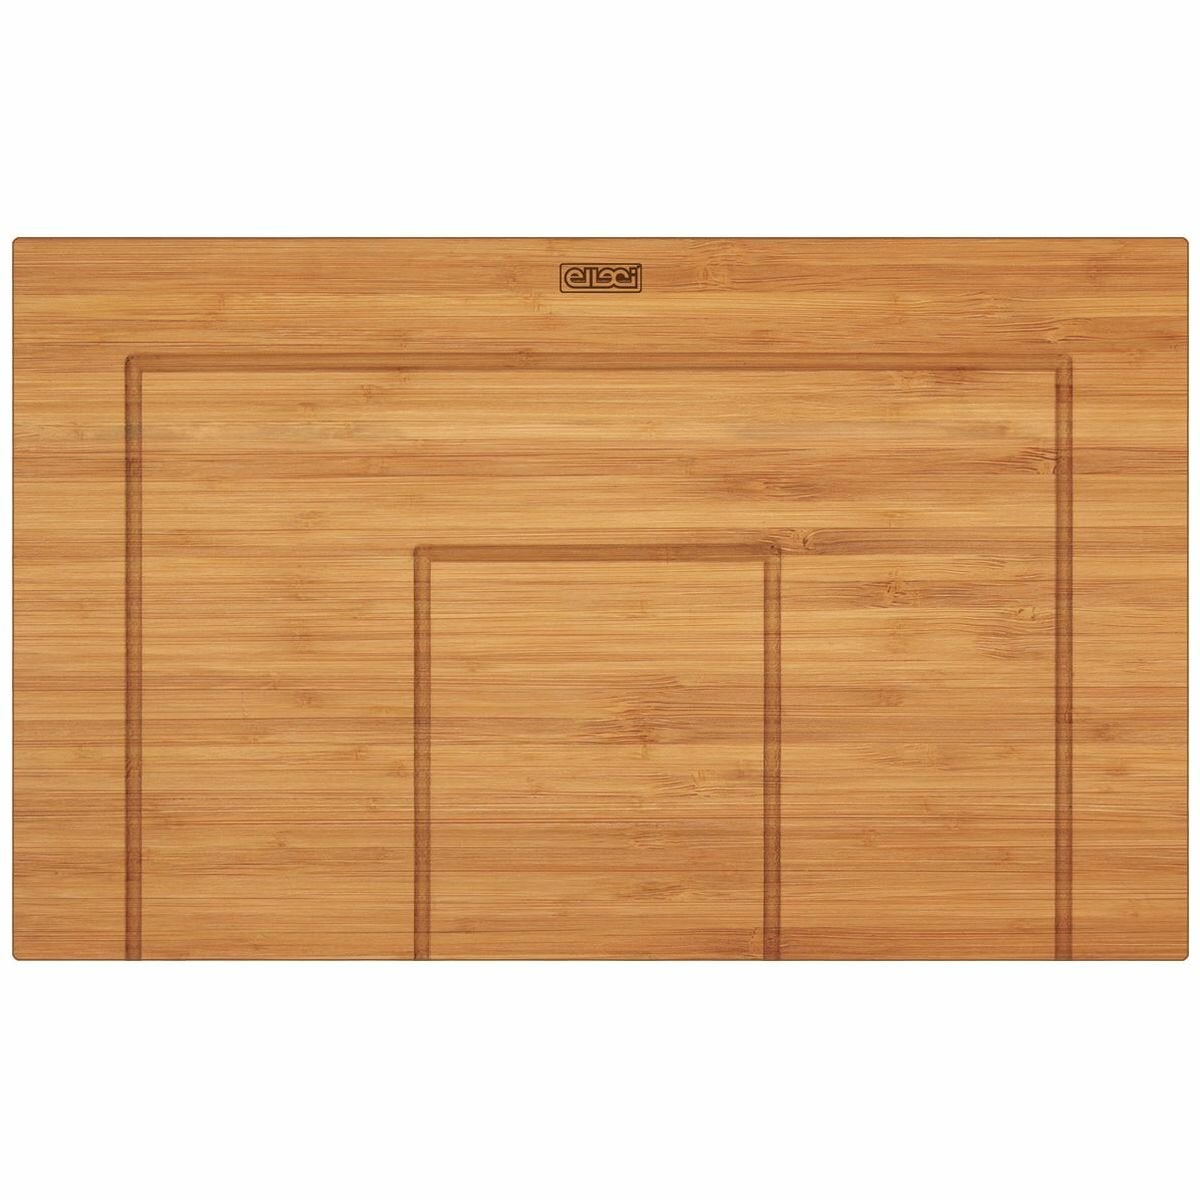 Image of Artusi Wooden Chopping Board Sink Accessory ATL01002